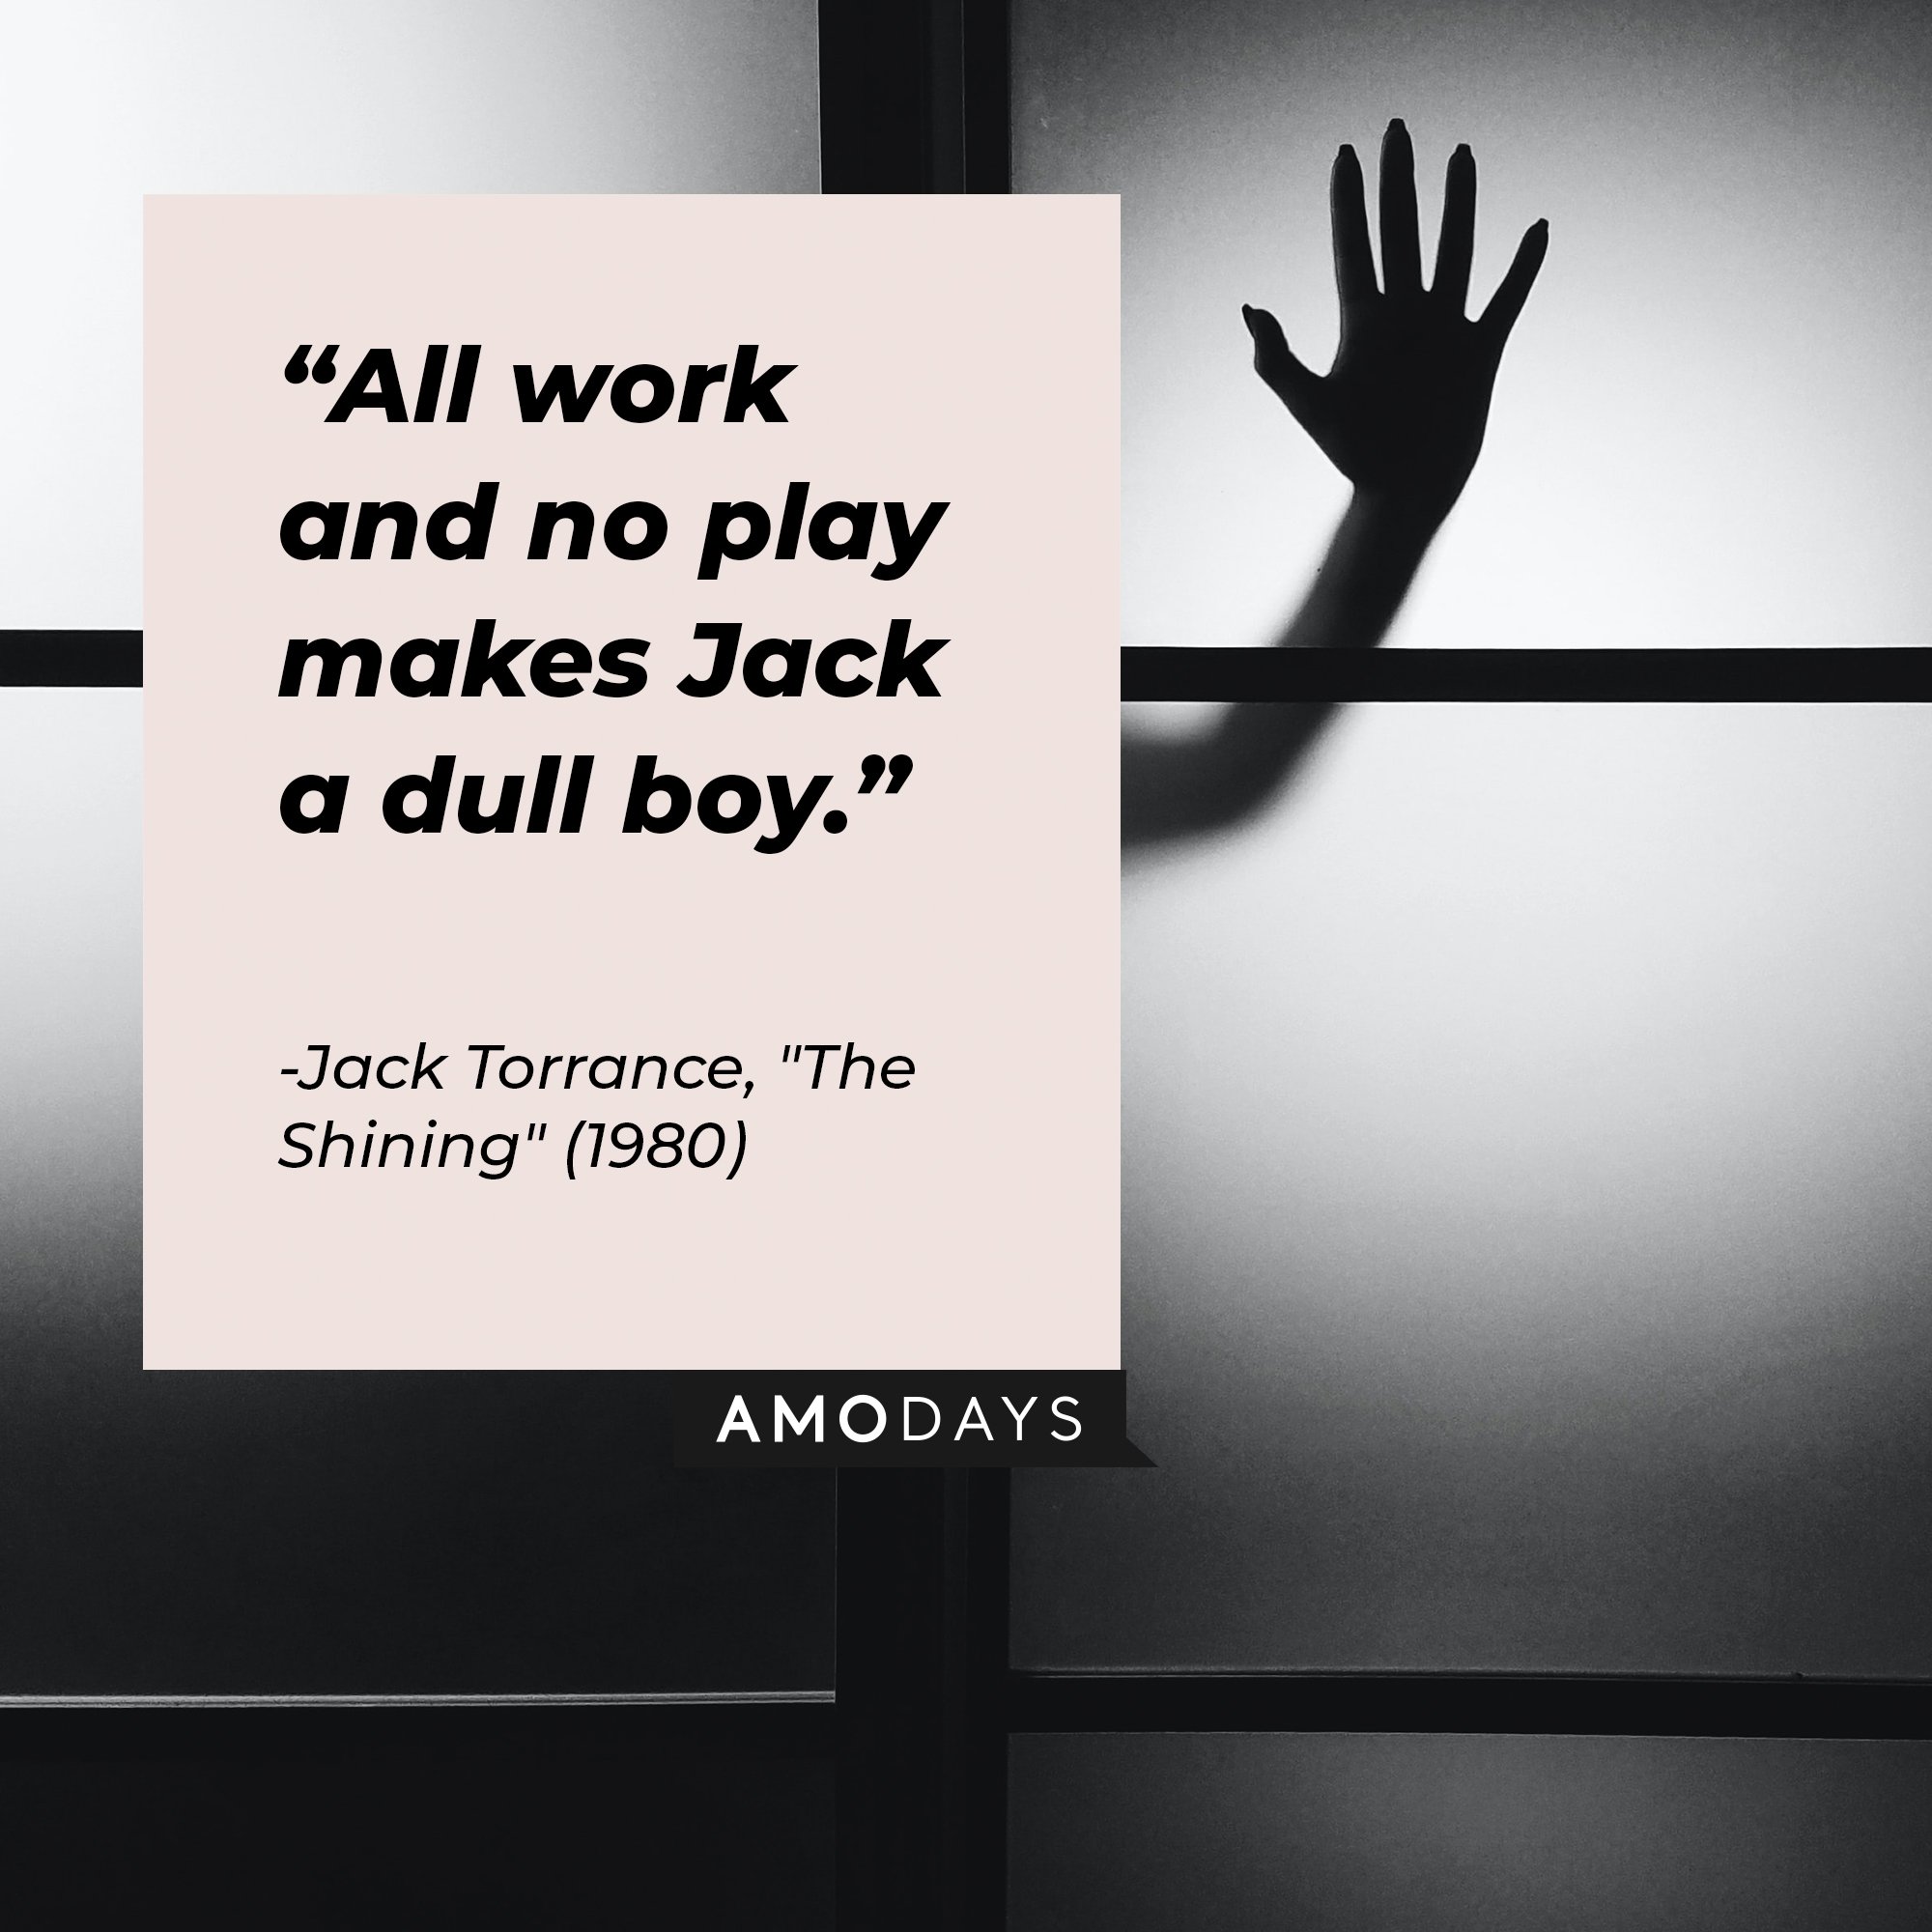  Jack Torrance,’s quote from “The Shining” 1980: "All work and no play makes Jack a dull boy." | Image: AmoDays